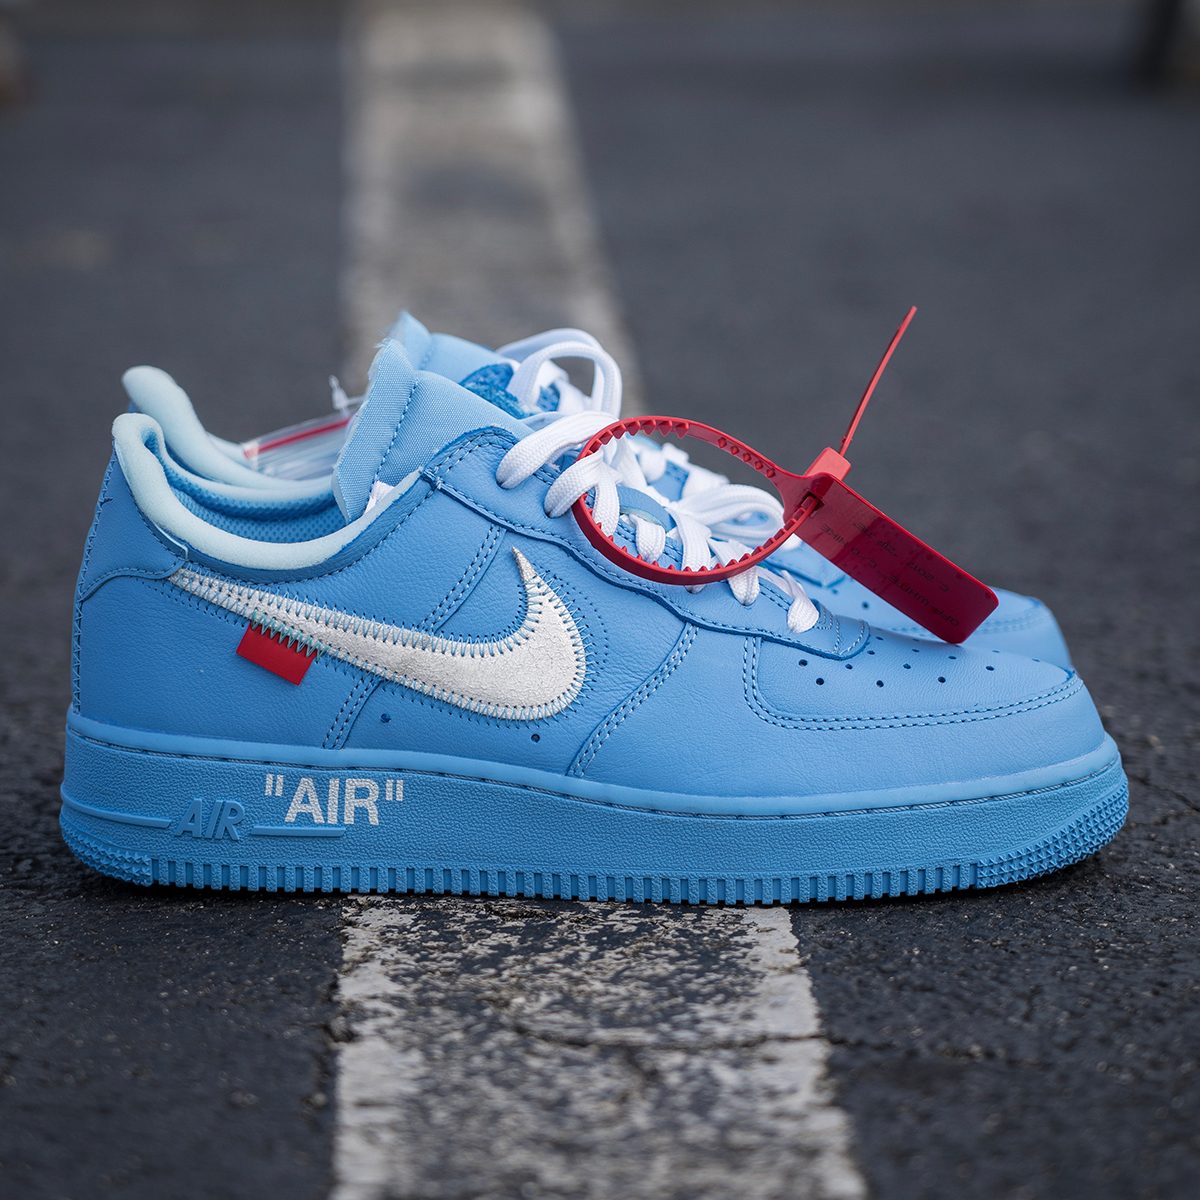 OFF-WHITE×NIKE AIR FORCE 1 "UNVIERSITY GOLD"【2021年発売予定！】 - SNEAKER NOTE